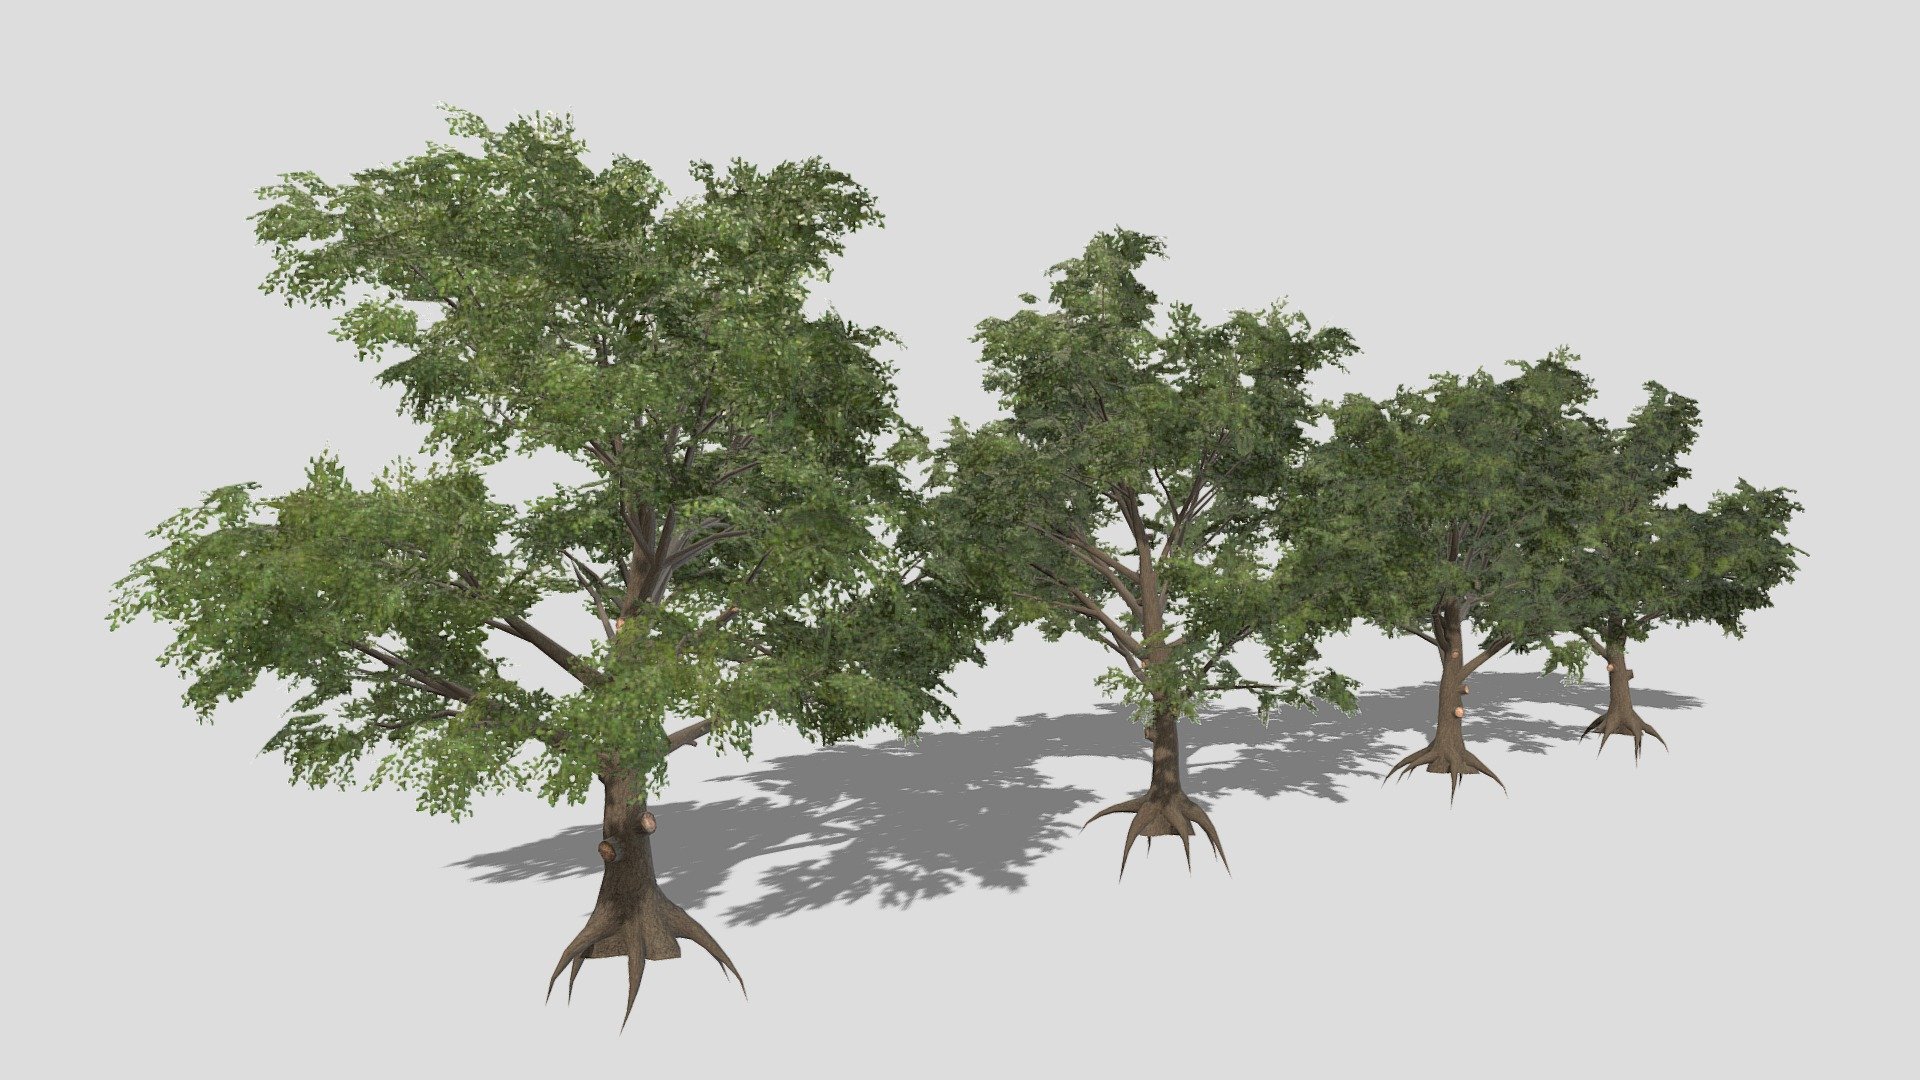 Set of Broadleaf trees

More examples of nature work can be seen here:https://www.artstation.com/leonlabyk

Feel free to contact should you have any requests for foliage assets setup for use with Unity or Unreal - Broadleaf - 3D model by studio lab (@leonlabyk) 3d model